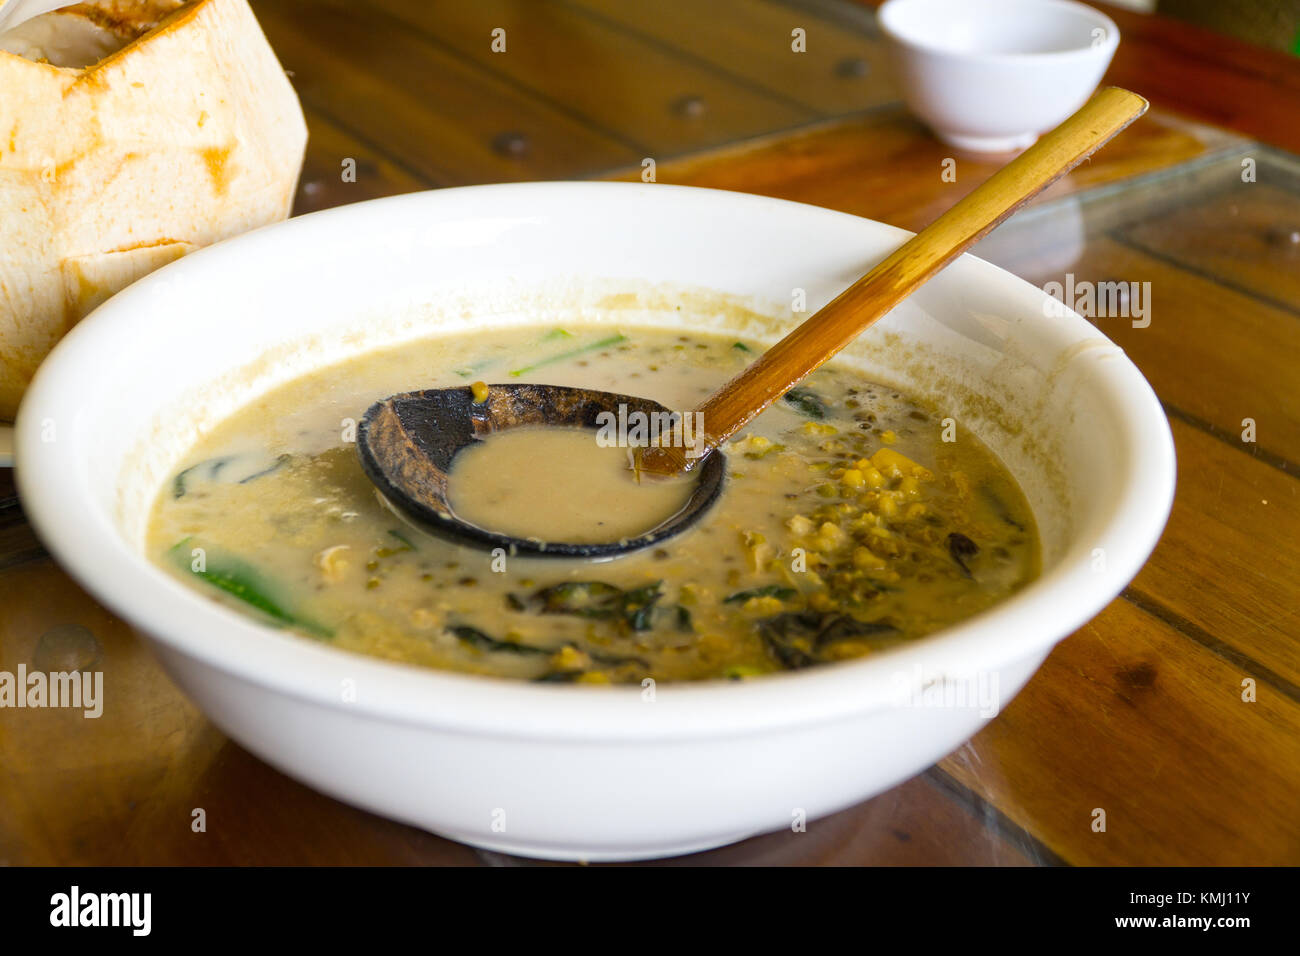 A bowl of Ginisang Munggo soup - a common traditional dish served in the Philippines. Stock Photo